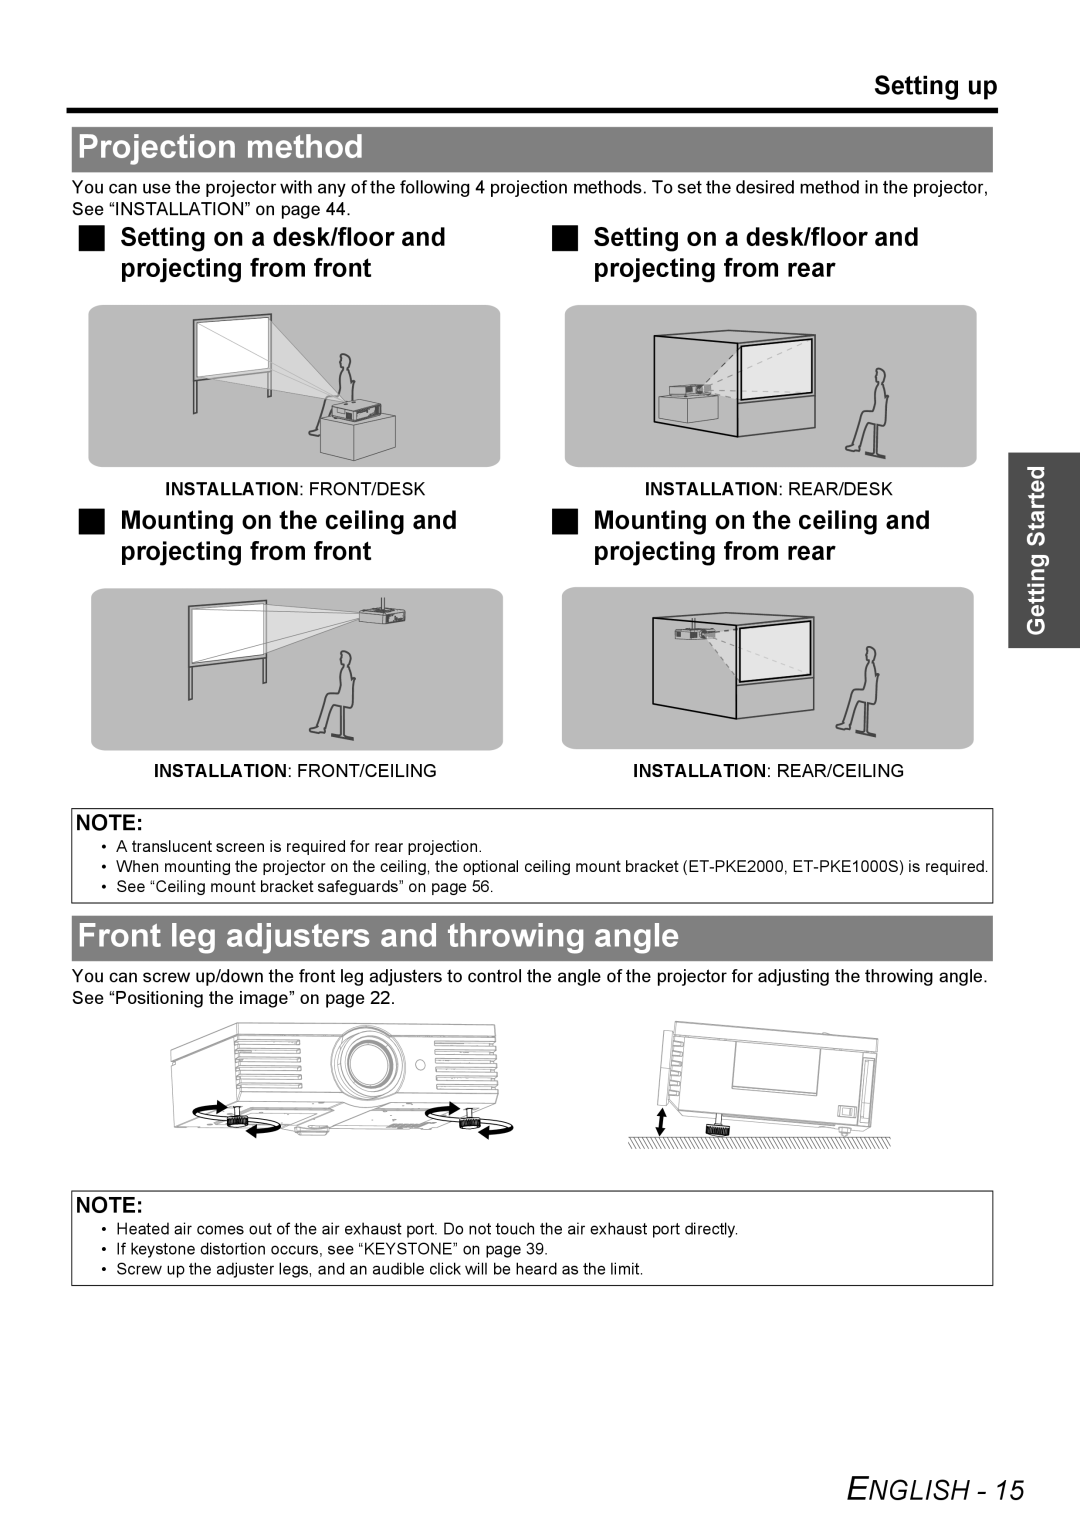 Panasonic PT-AE3000E manual Projection method, Front leg adjusters and throwing angle, Setting up, English, Getting Started 